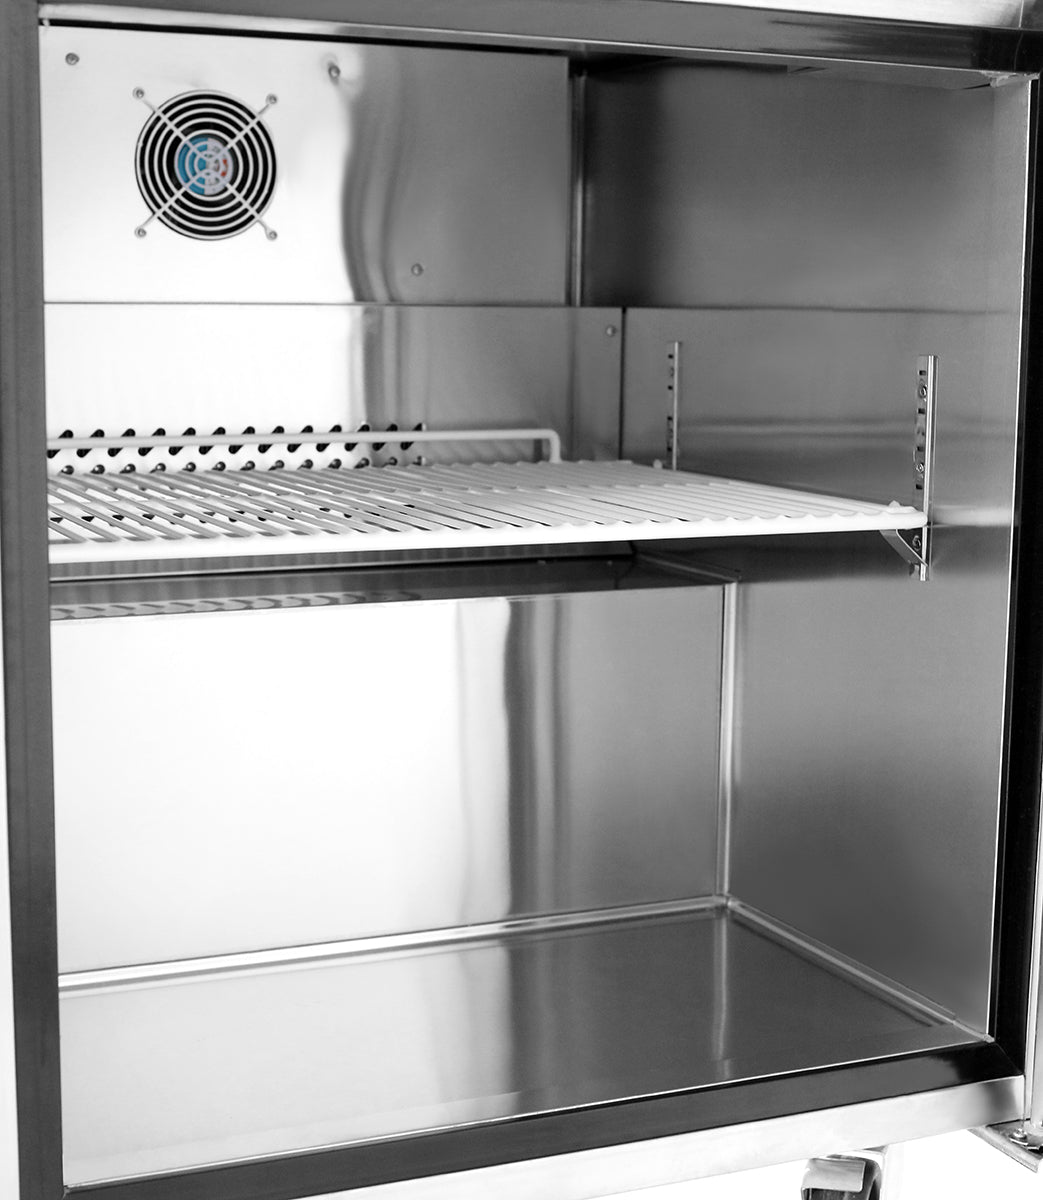 Atosa MGF8405GR 27'' Undercounter-Freezer Right Hinged Dimensions: 27-1/2 W * 30 D * 34-1/8 H